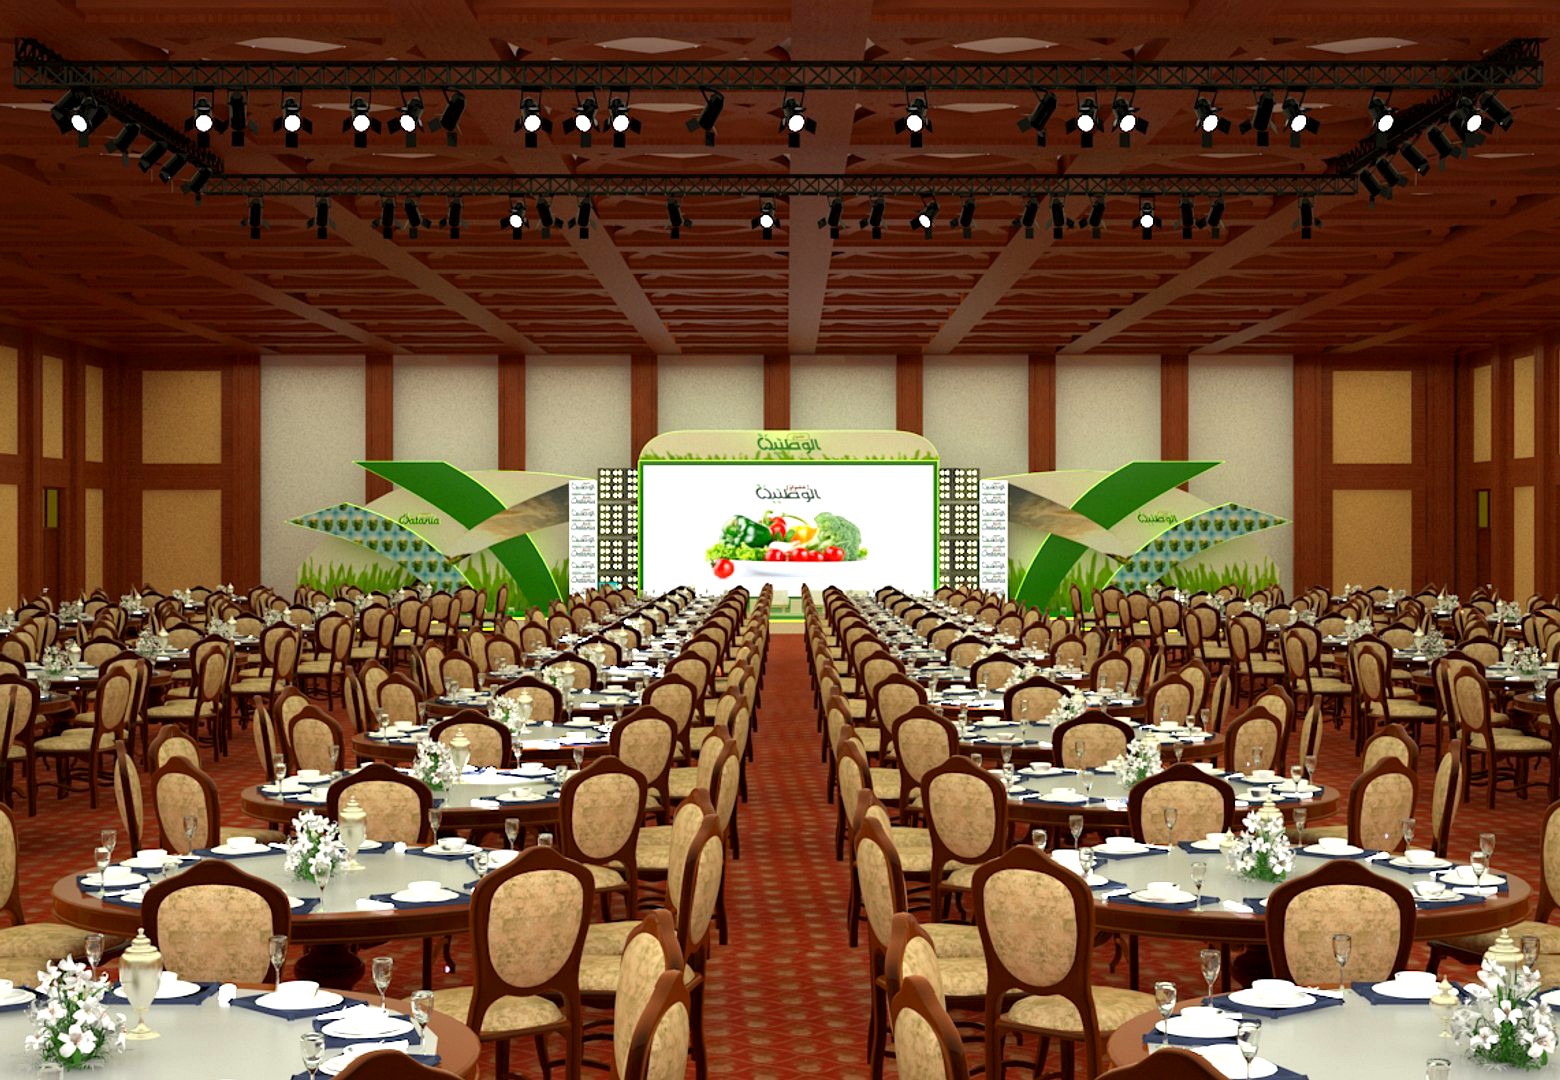 Event Stage in hall